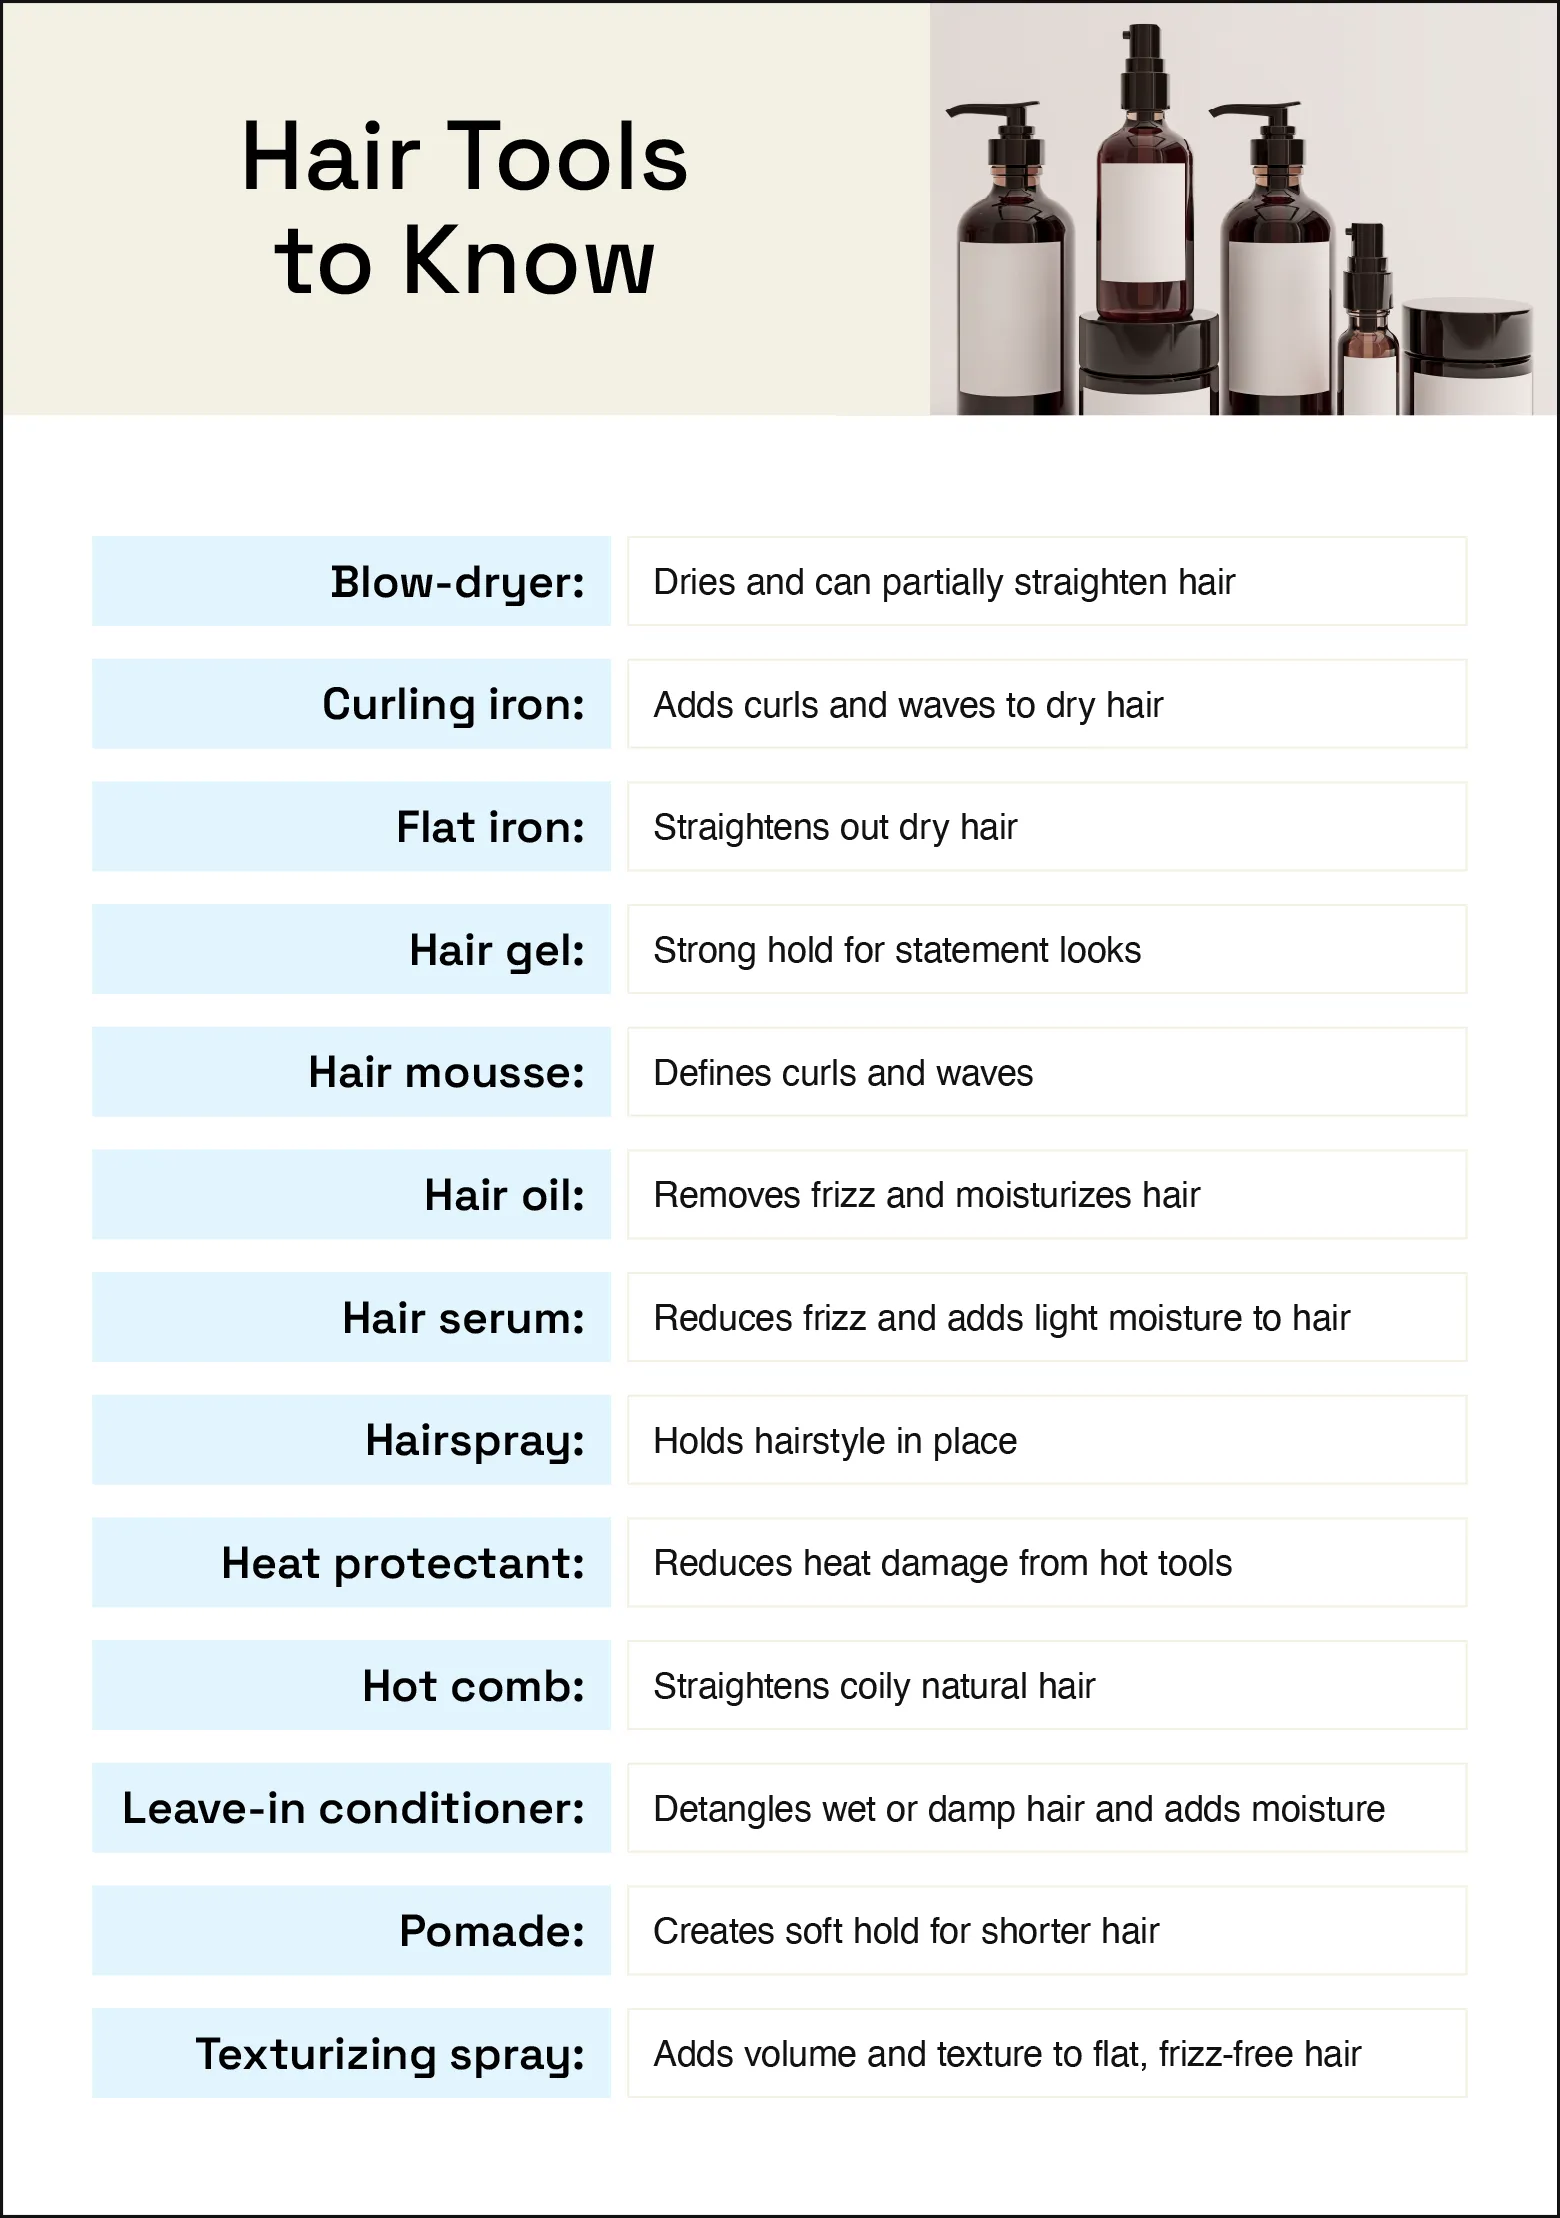 Image naming basic hair tools and what they do for your hair.